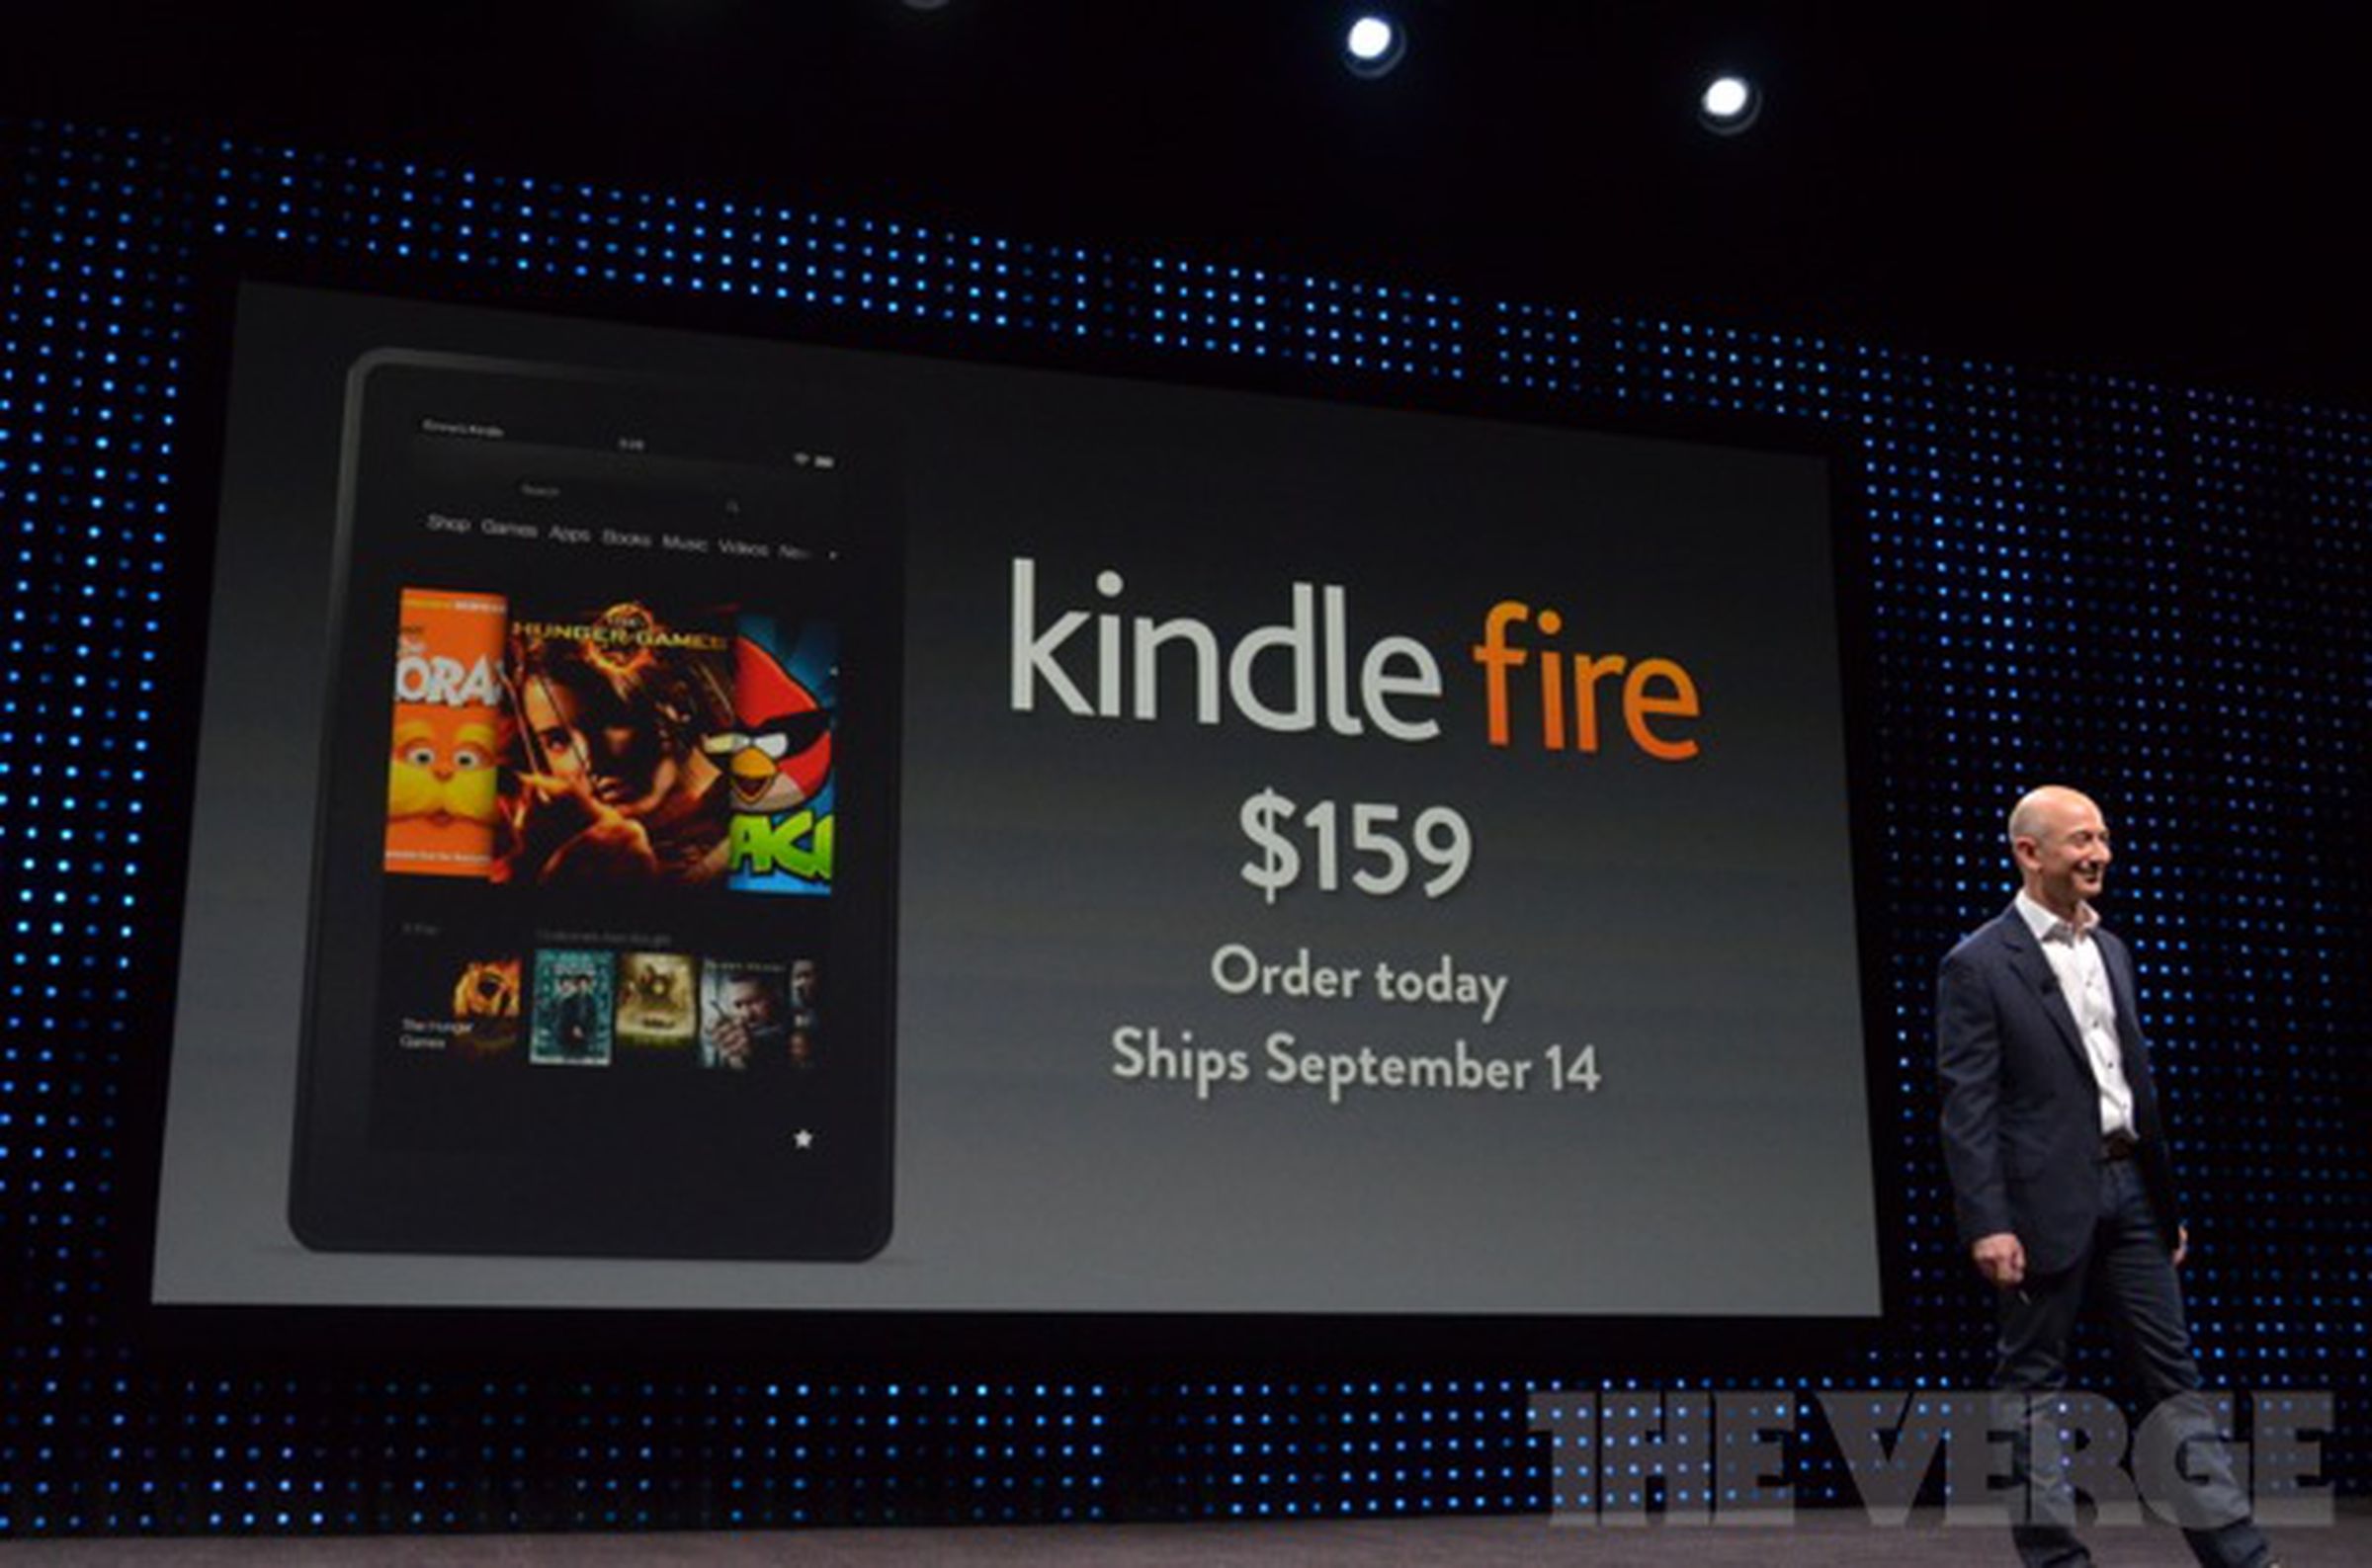 Amazon's new $159 7-inch Kindle Fire images